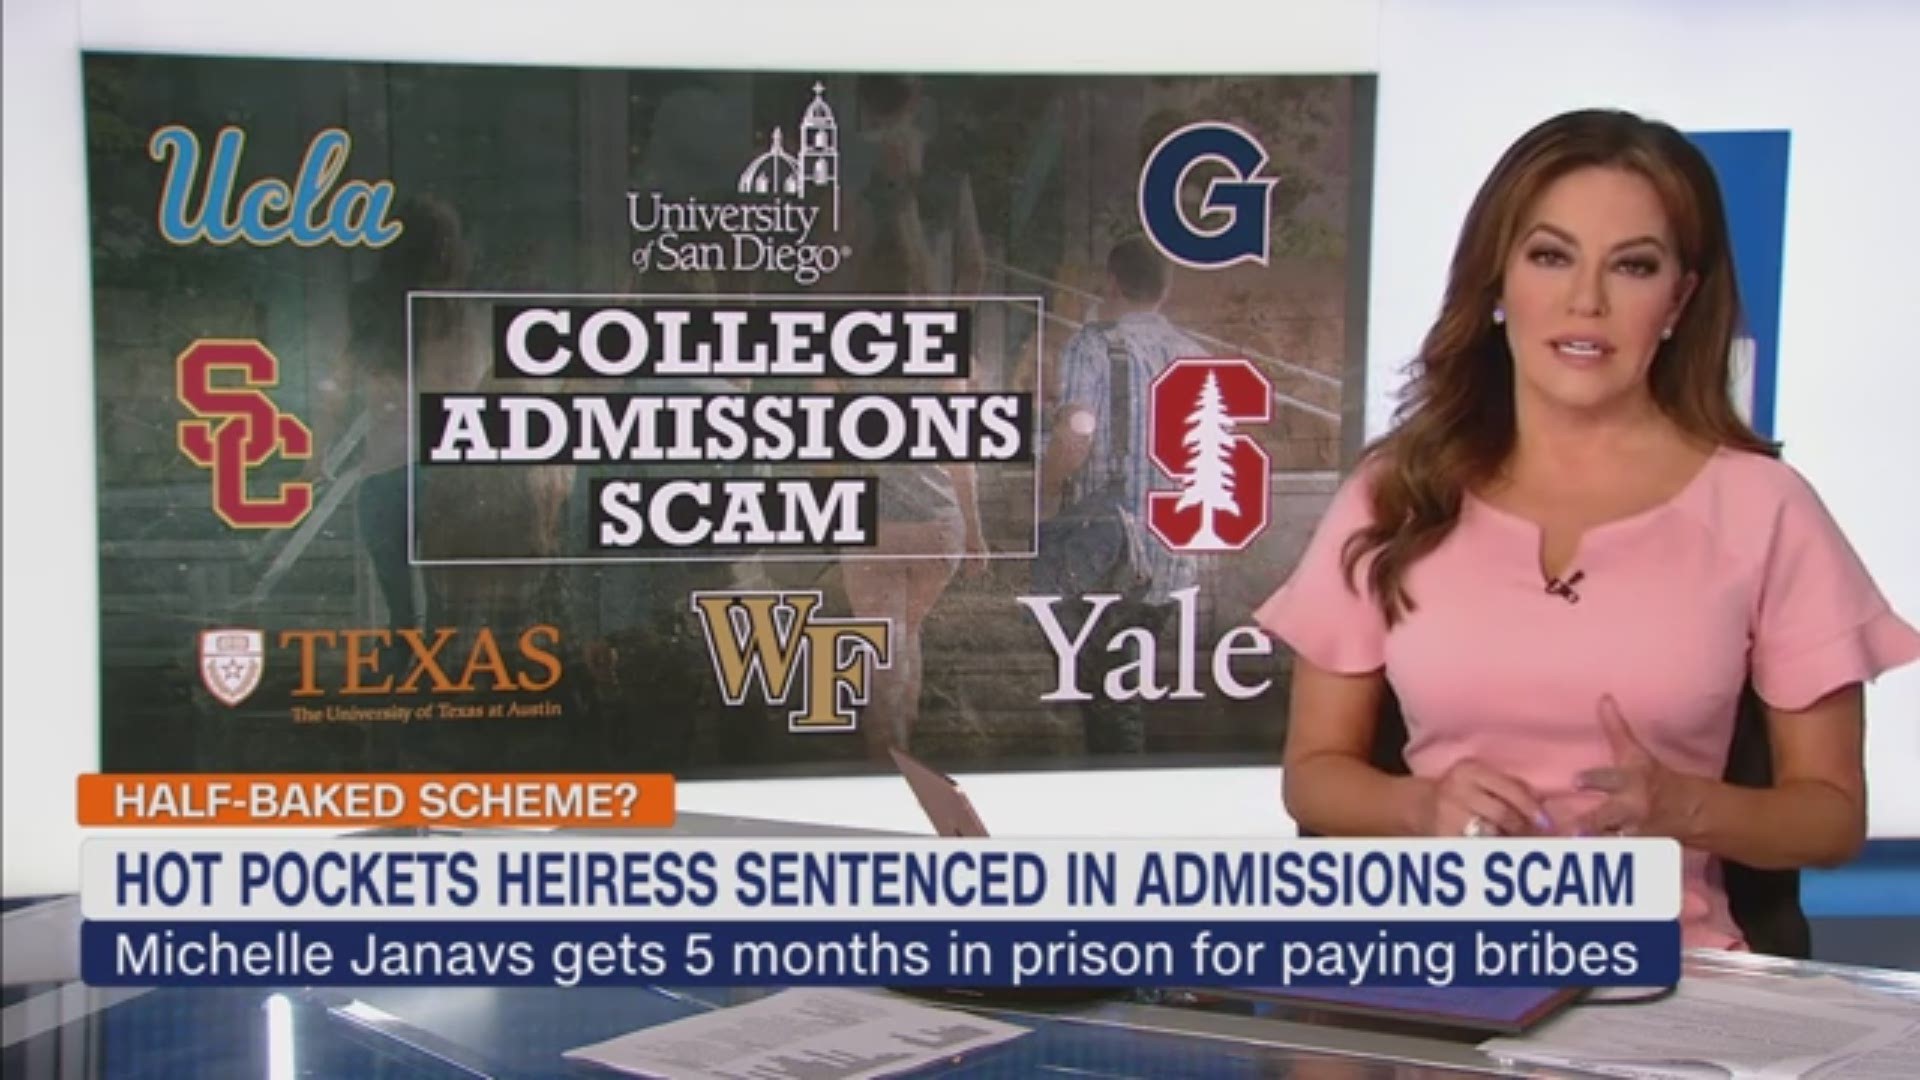 Former food company executive Michelle Janavs was sentenced to five months in prison for paying bribes in the college
admissions scam.